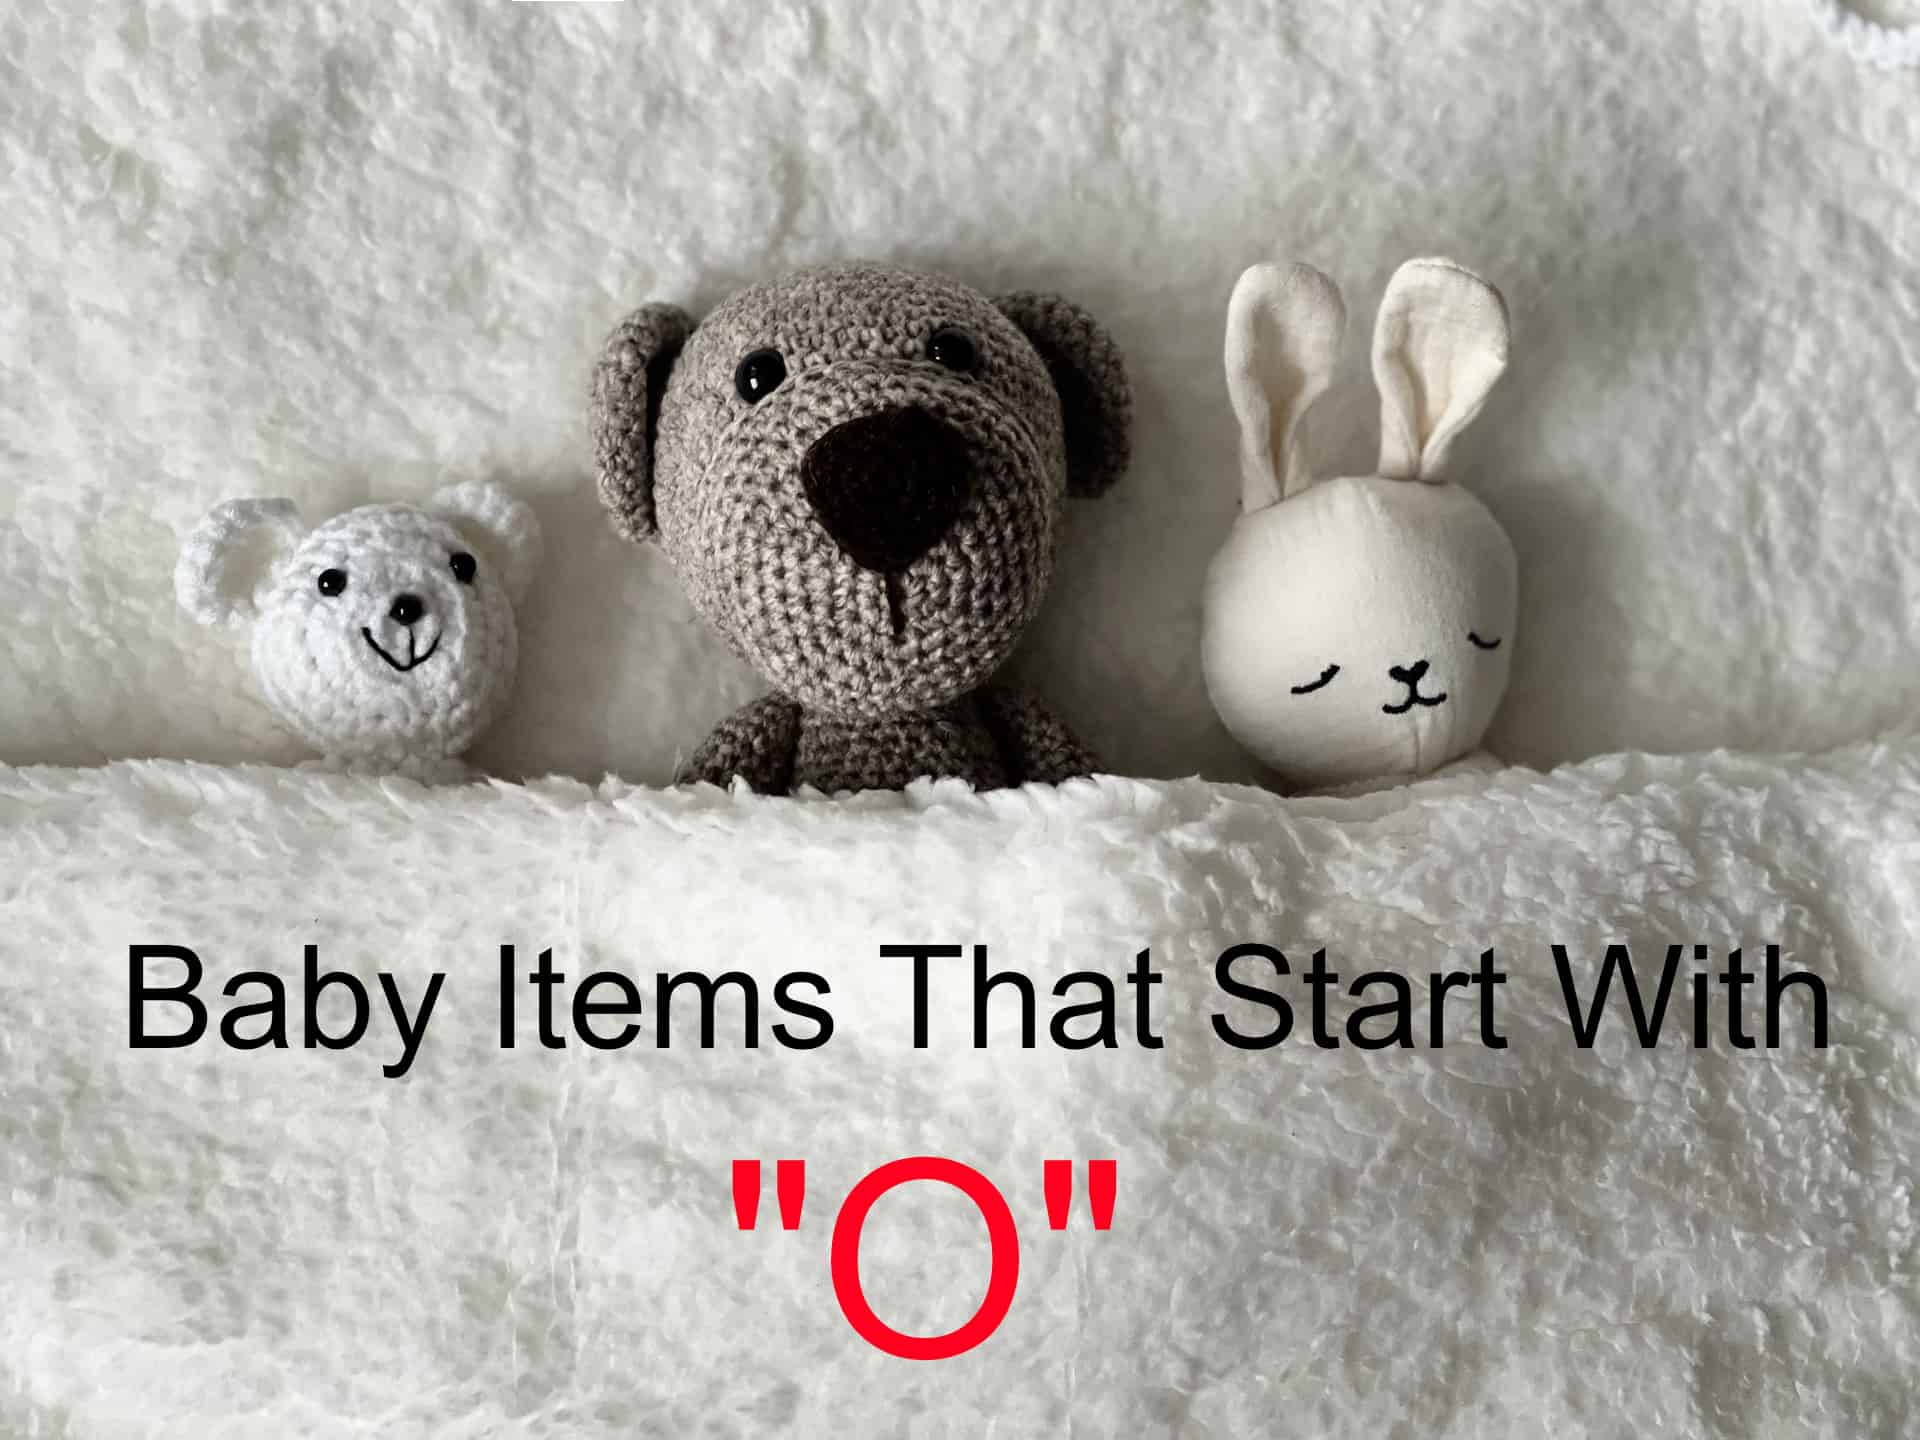 baby items that start with O